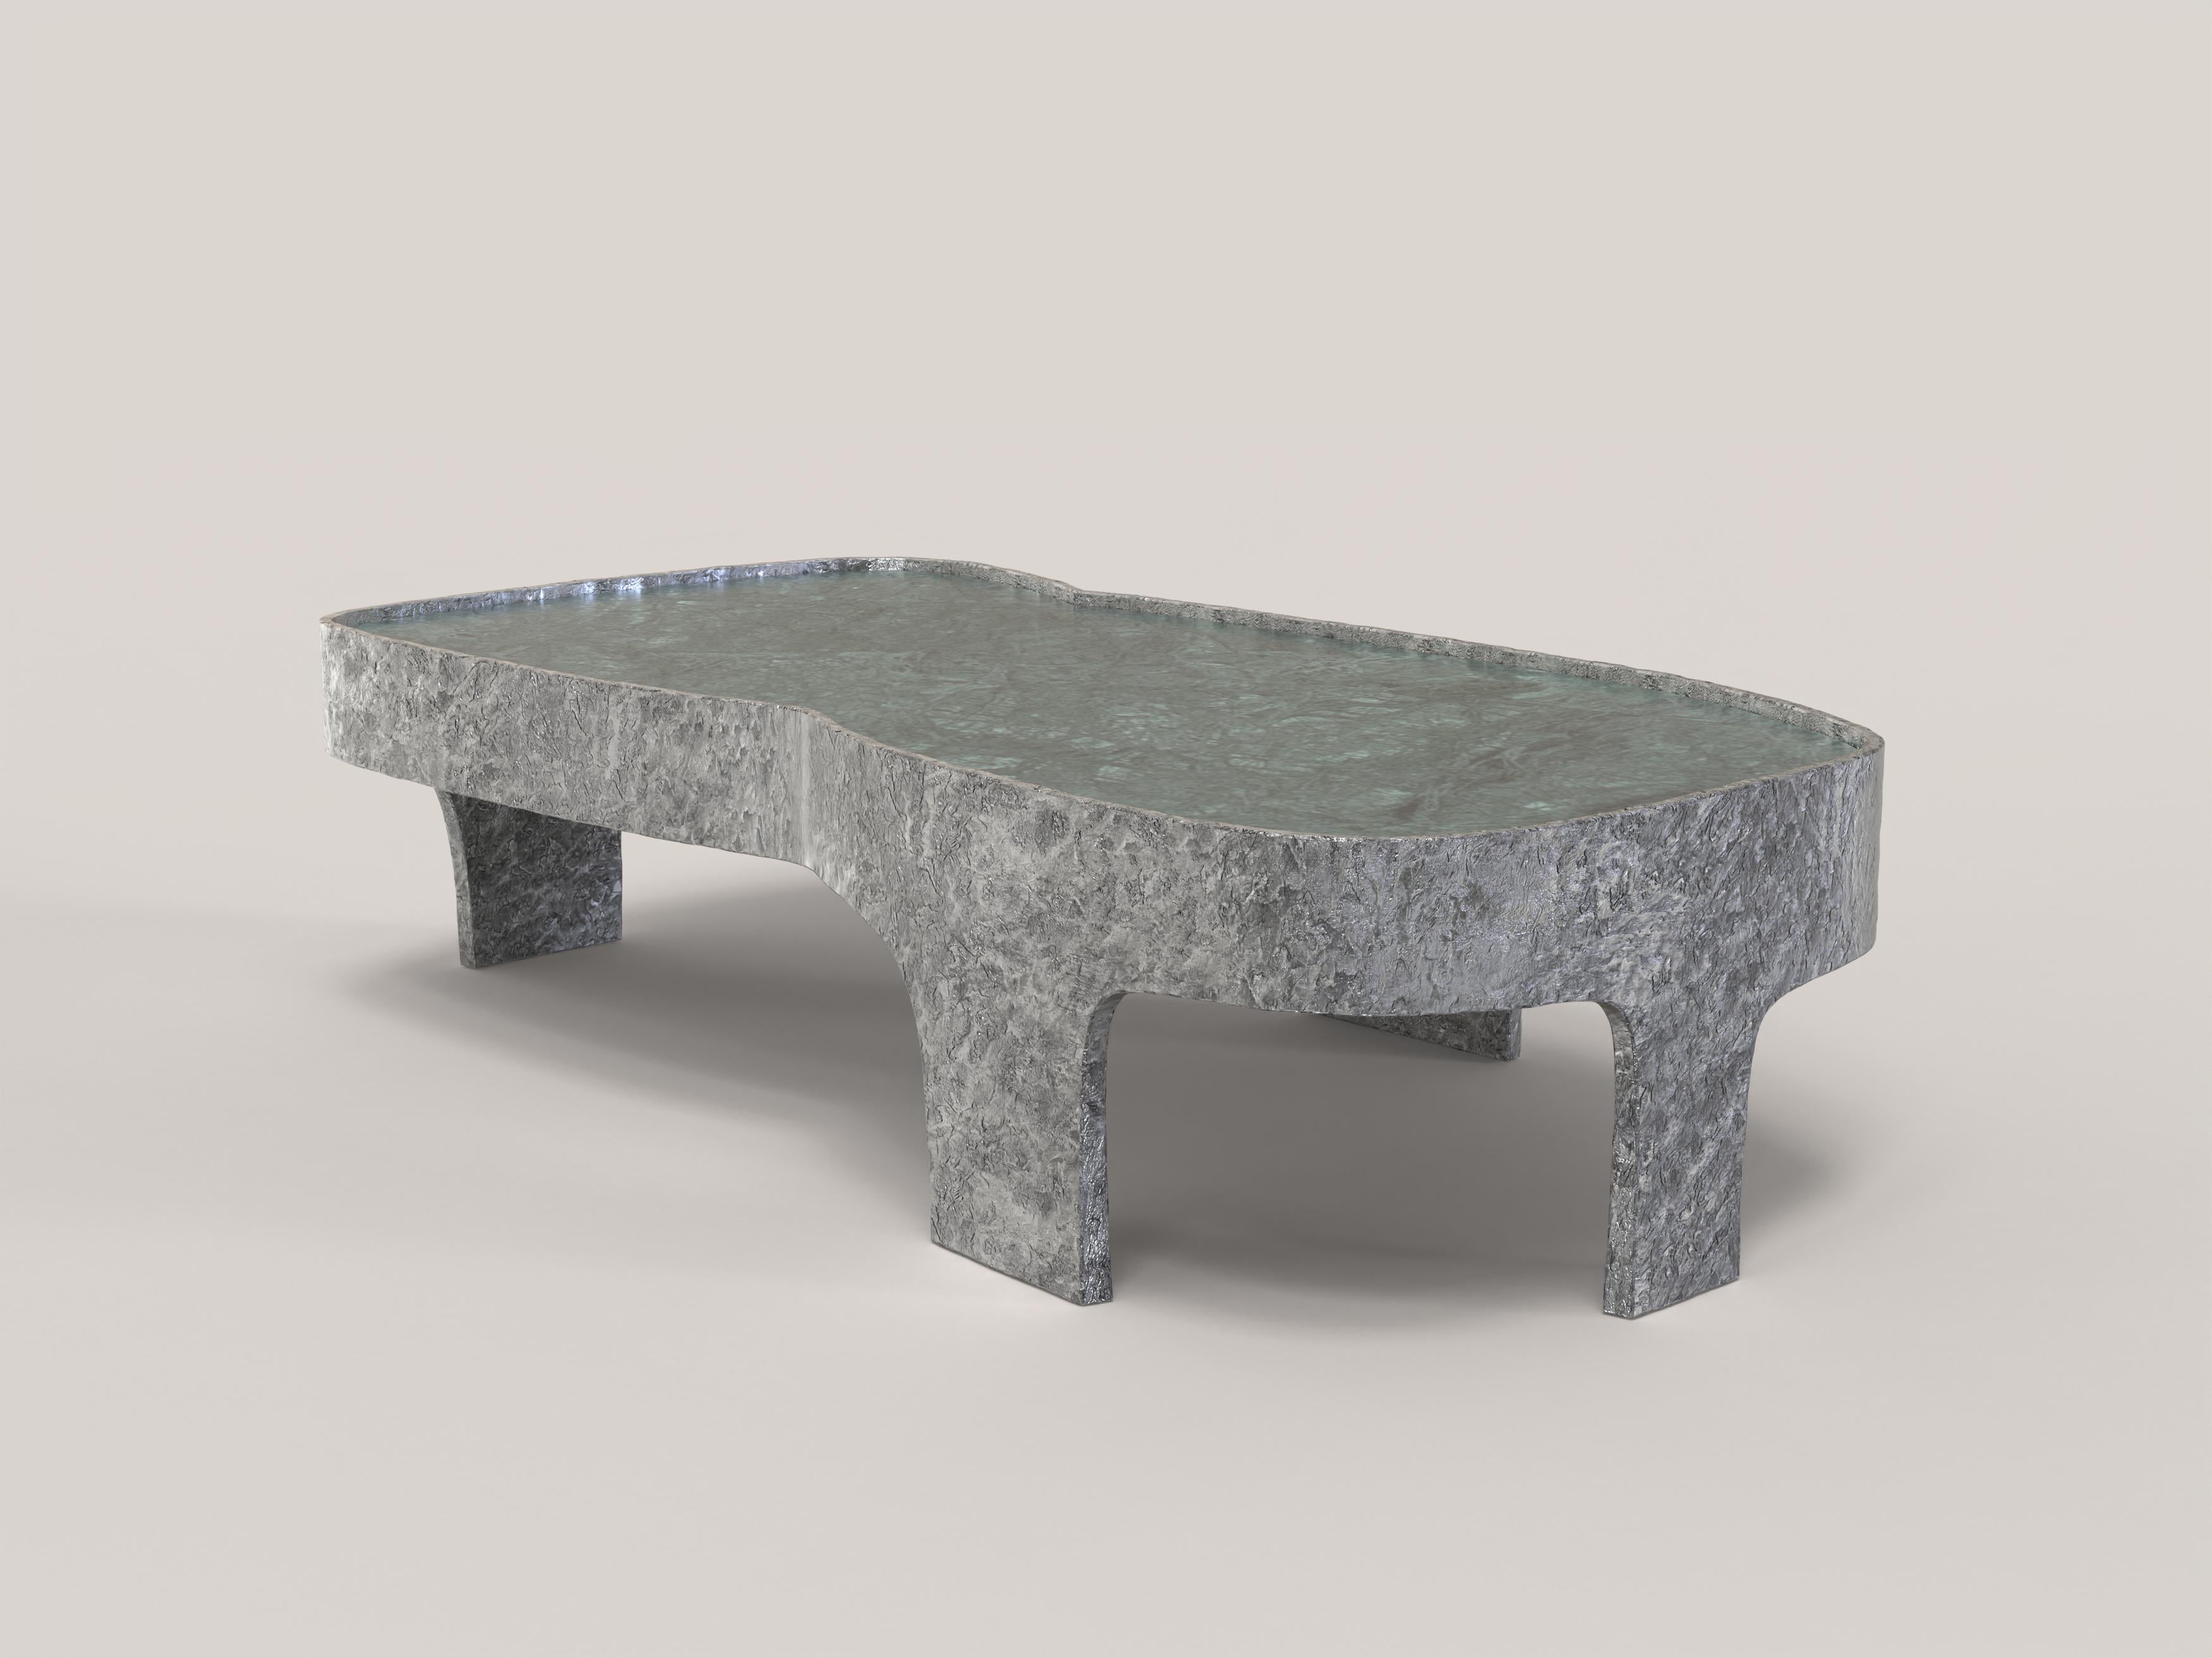 Sumatra V3 Low Table by Edizione Limitata
Limited Edition of 15 + 3 pieces. Signed and numbered.
Dimensions: D 120 x W 60 x H 30 cm.
Materials: Cast aluminum and Green Guatemala Marble.

Sumatra is a 21st Century collection of tables made by Italian